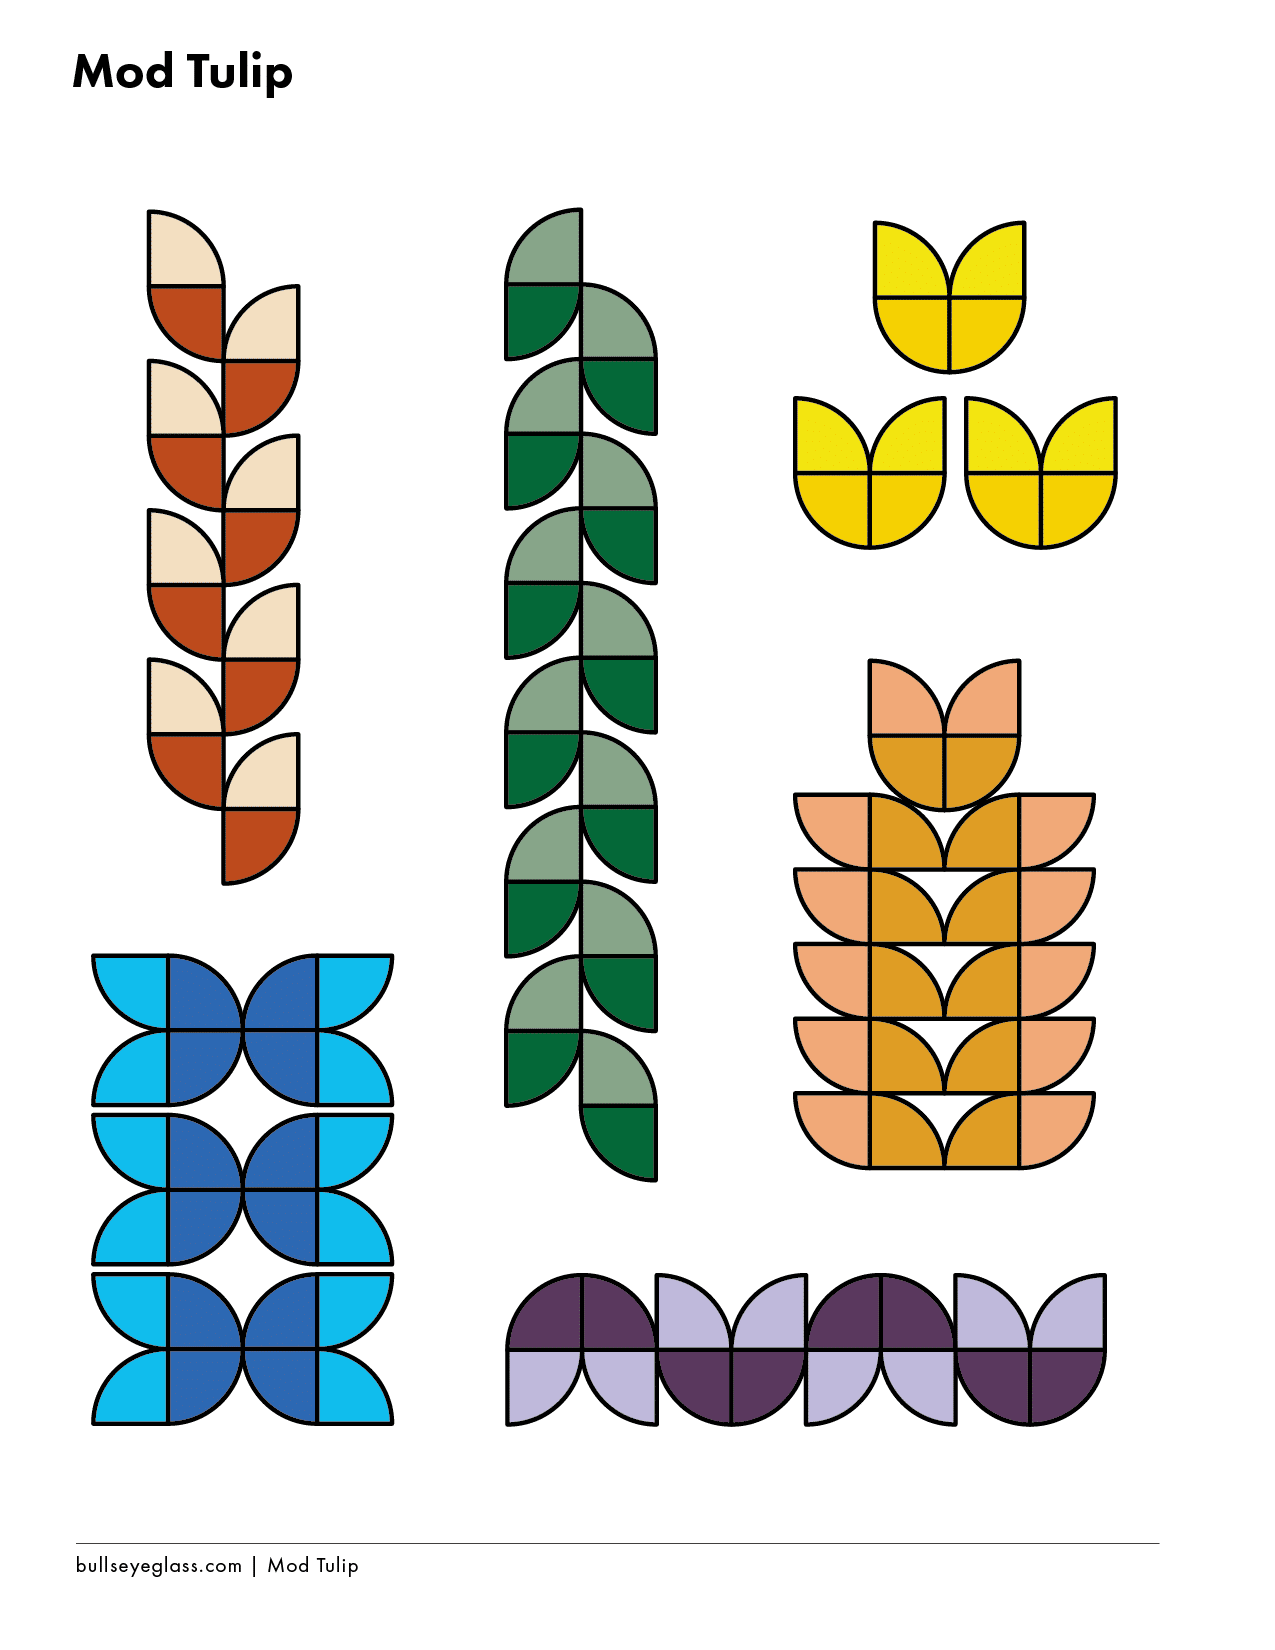 modern tulip stained glass design